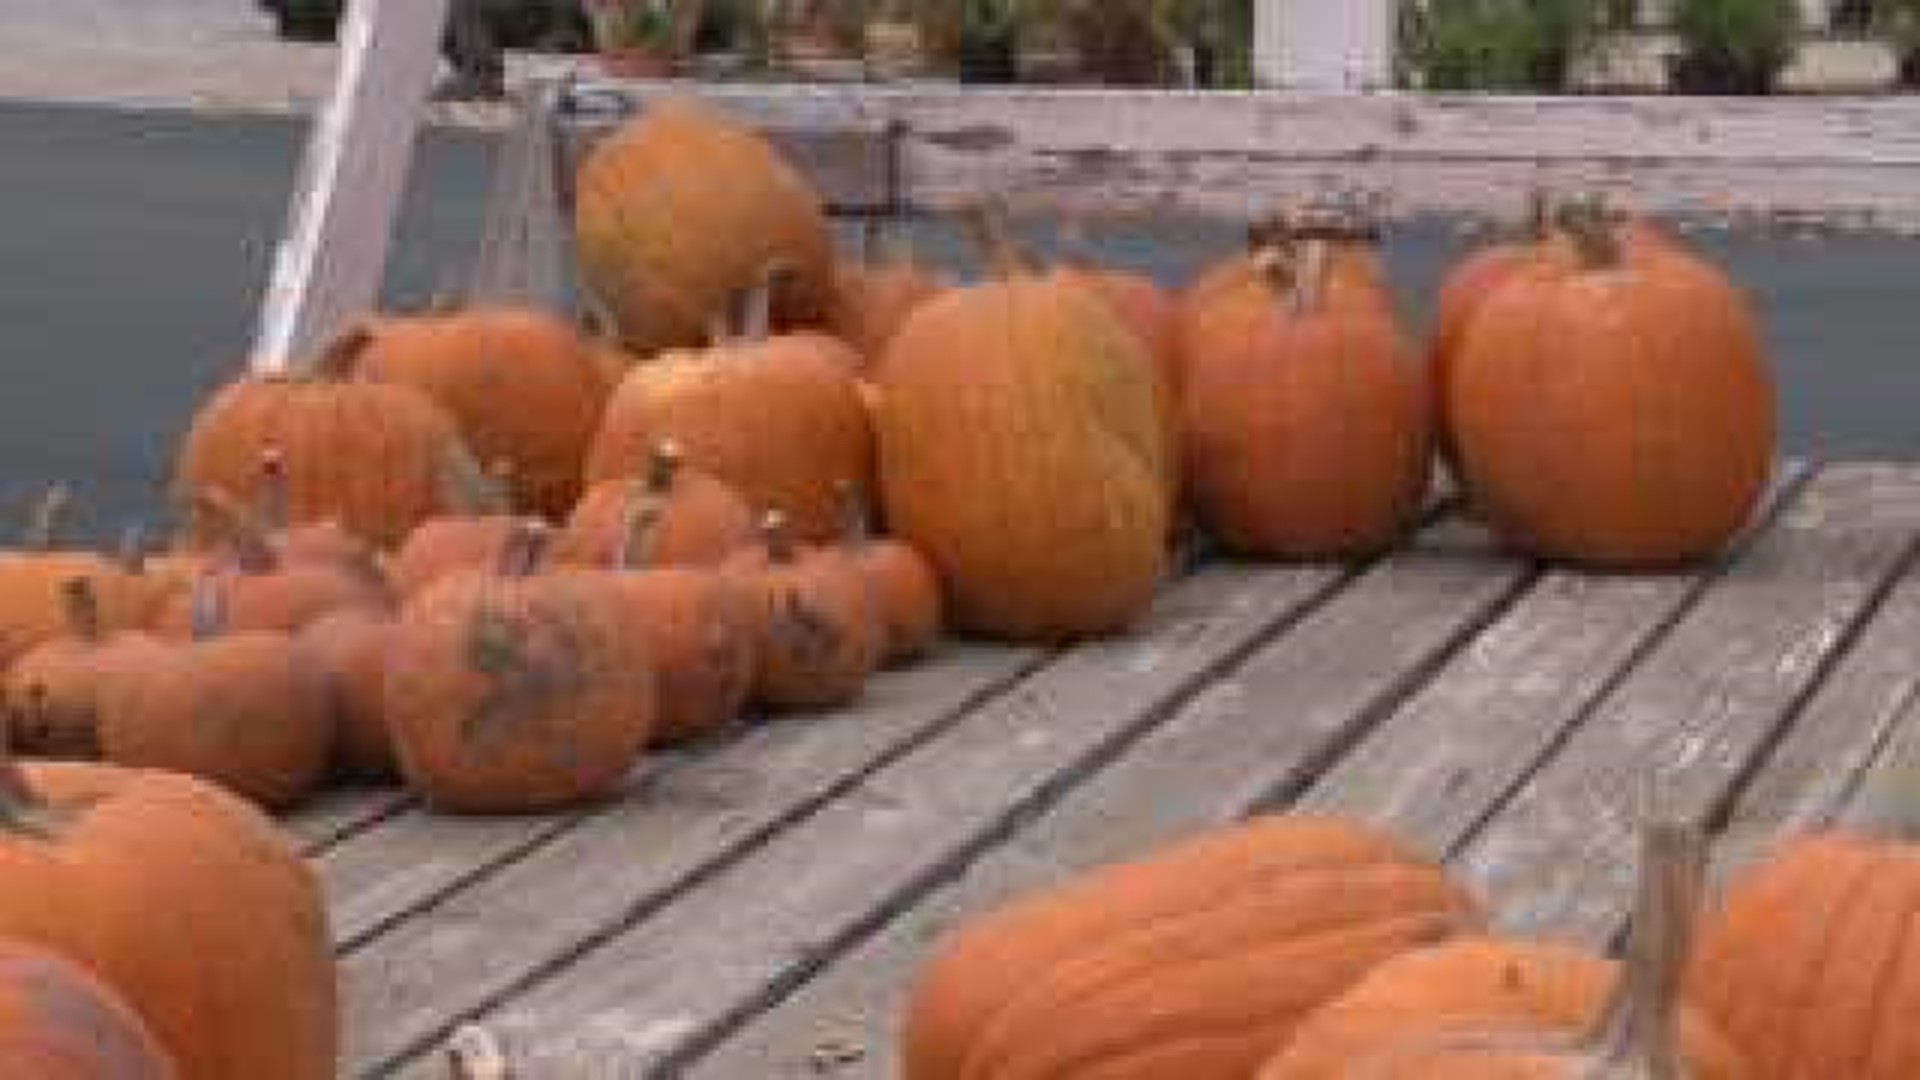 Pumpkin crop is scarcer, more costly this season